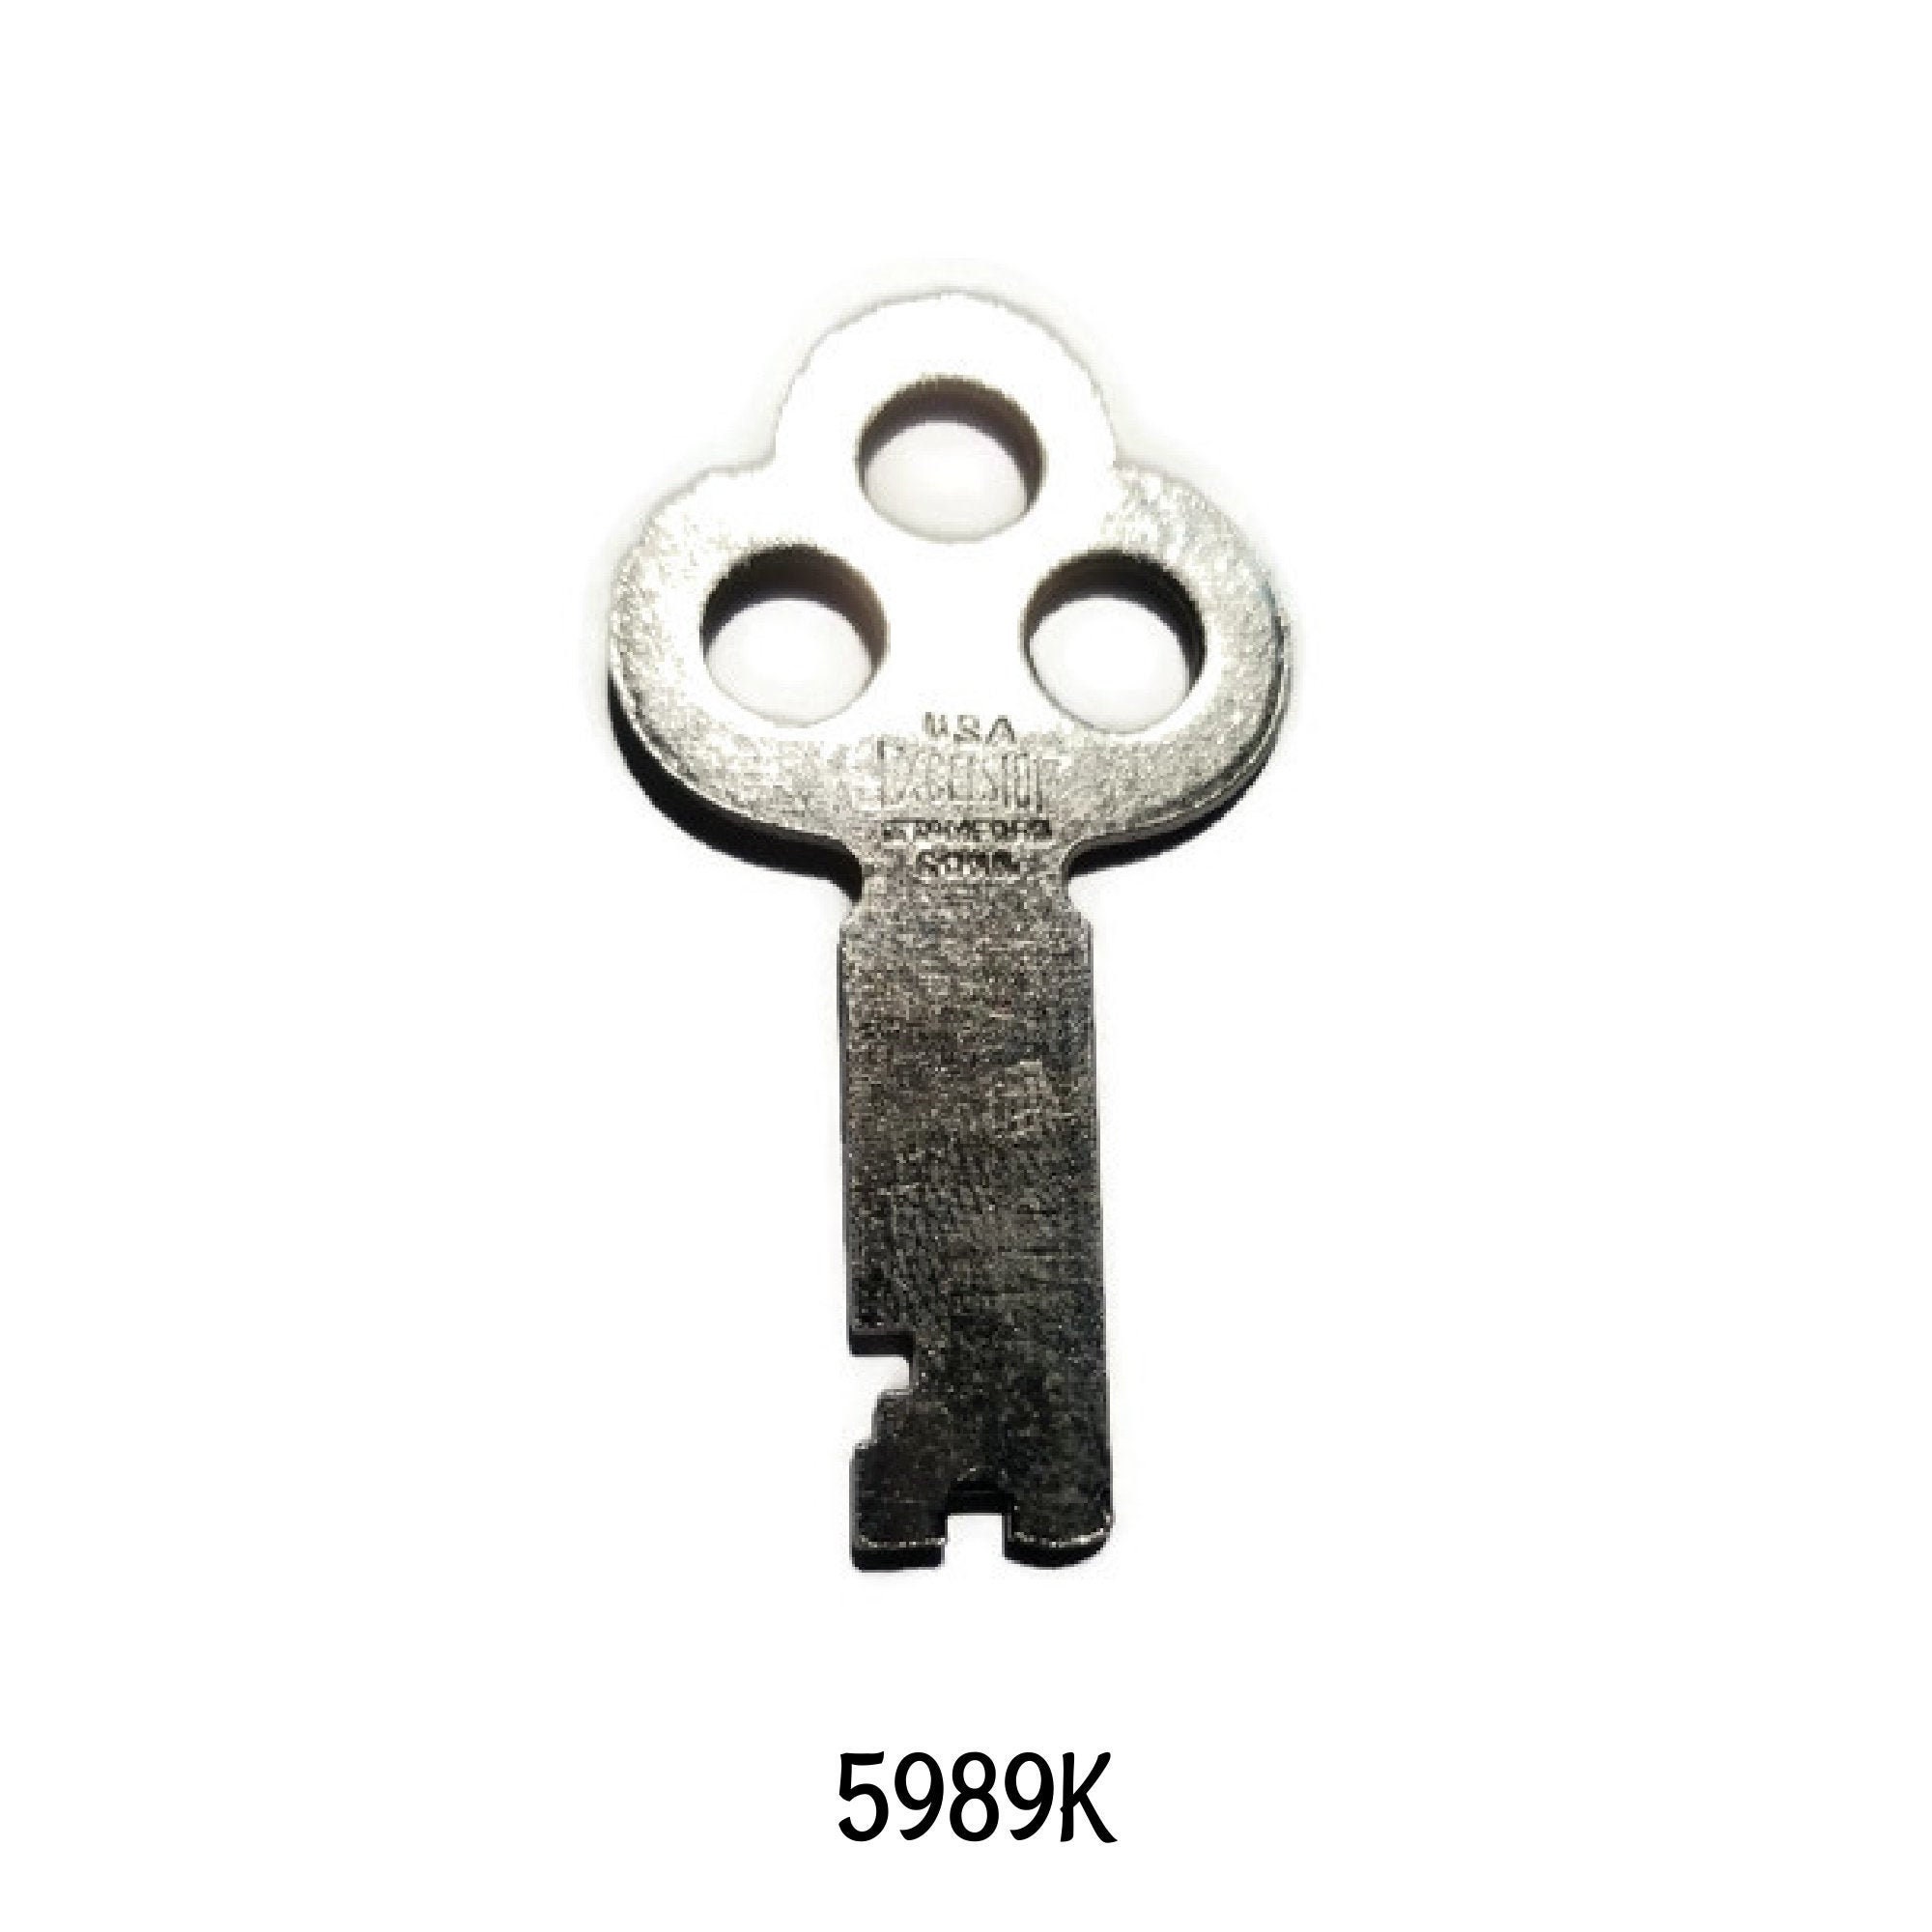 Trunk Lock Key --T-46k T46 3815 3835 trunk chest steamer vintage antique  spare extra - Furniture Restoration Hardware and Supplies